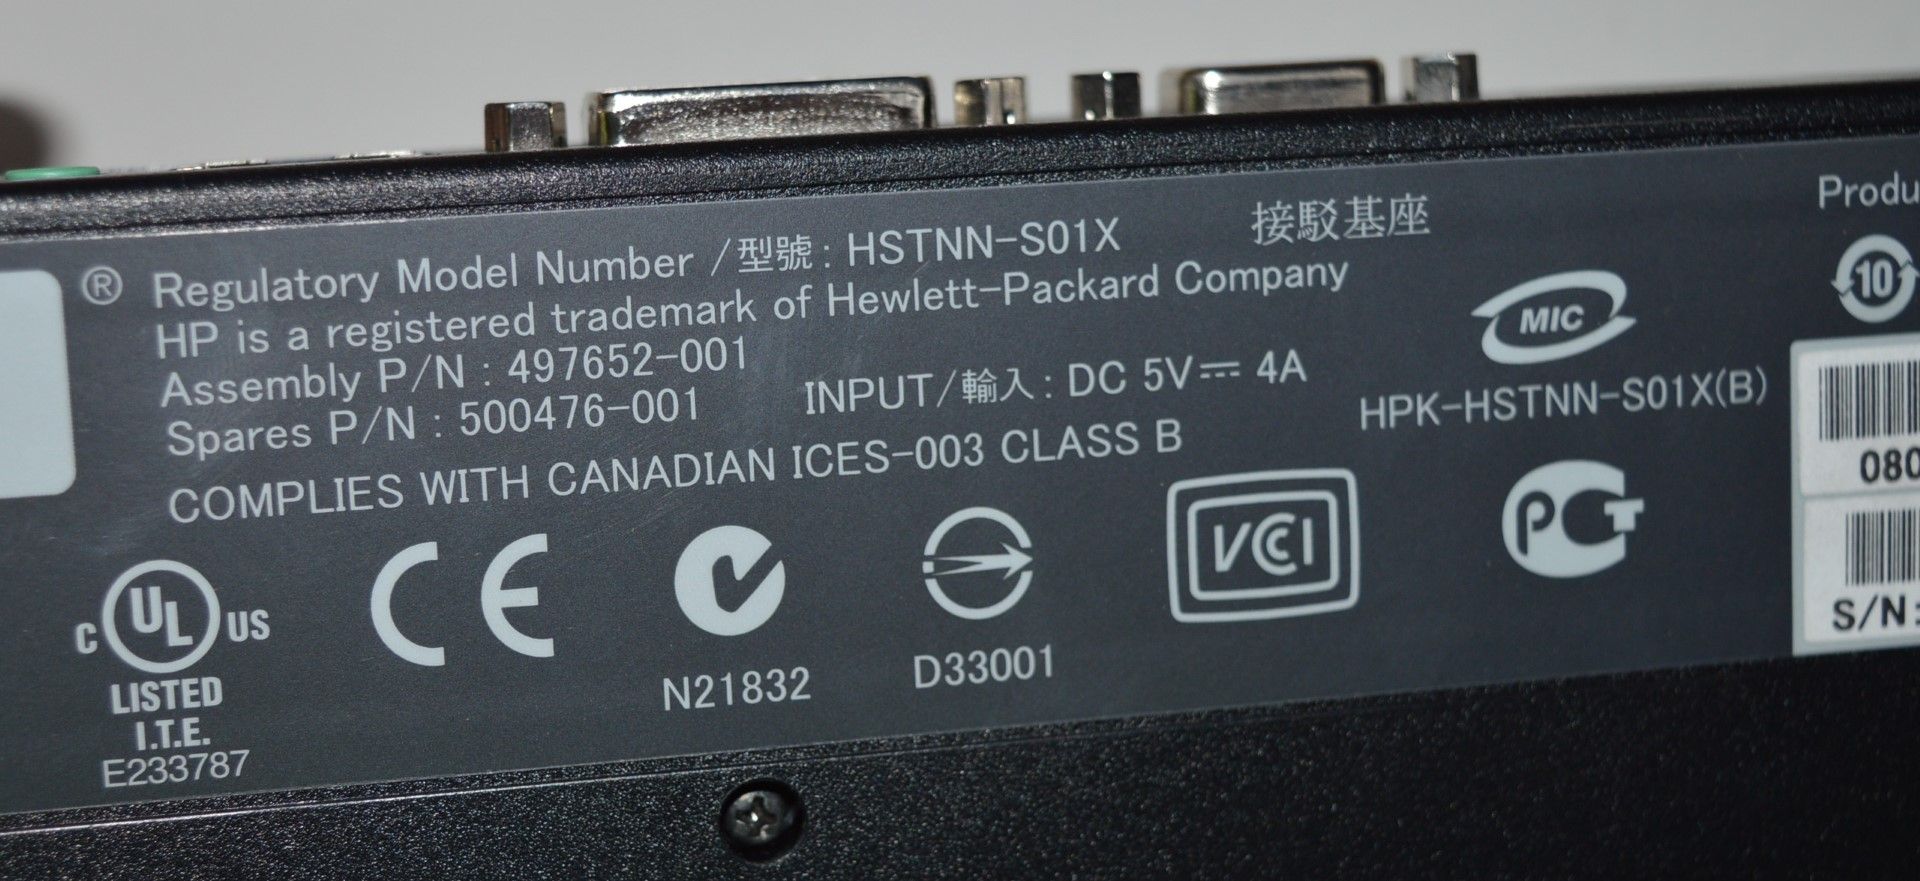 1 x HP USB Docking Station Port Replicator - Model HSTNN-S01X - With Manual and Power Adaptor - - Image 4 of 4